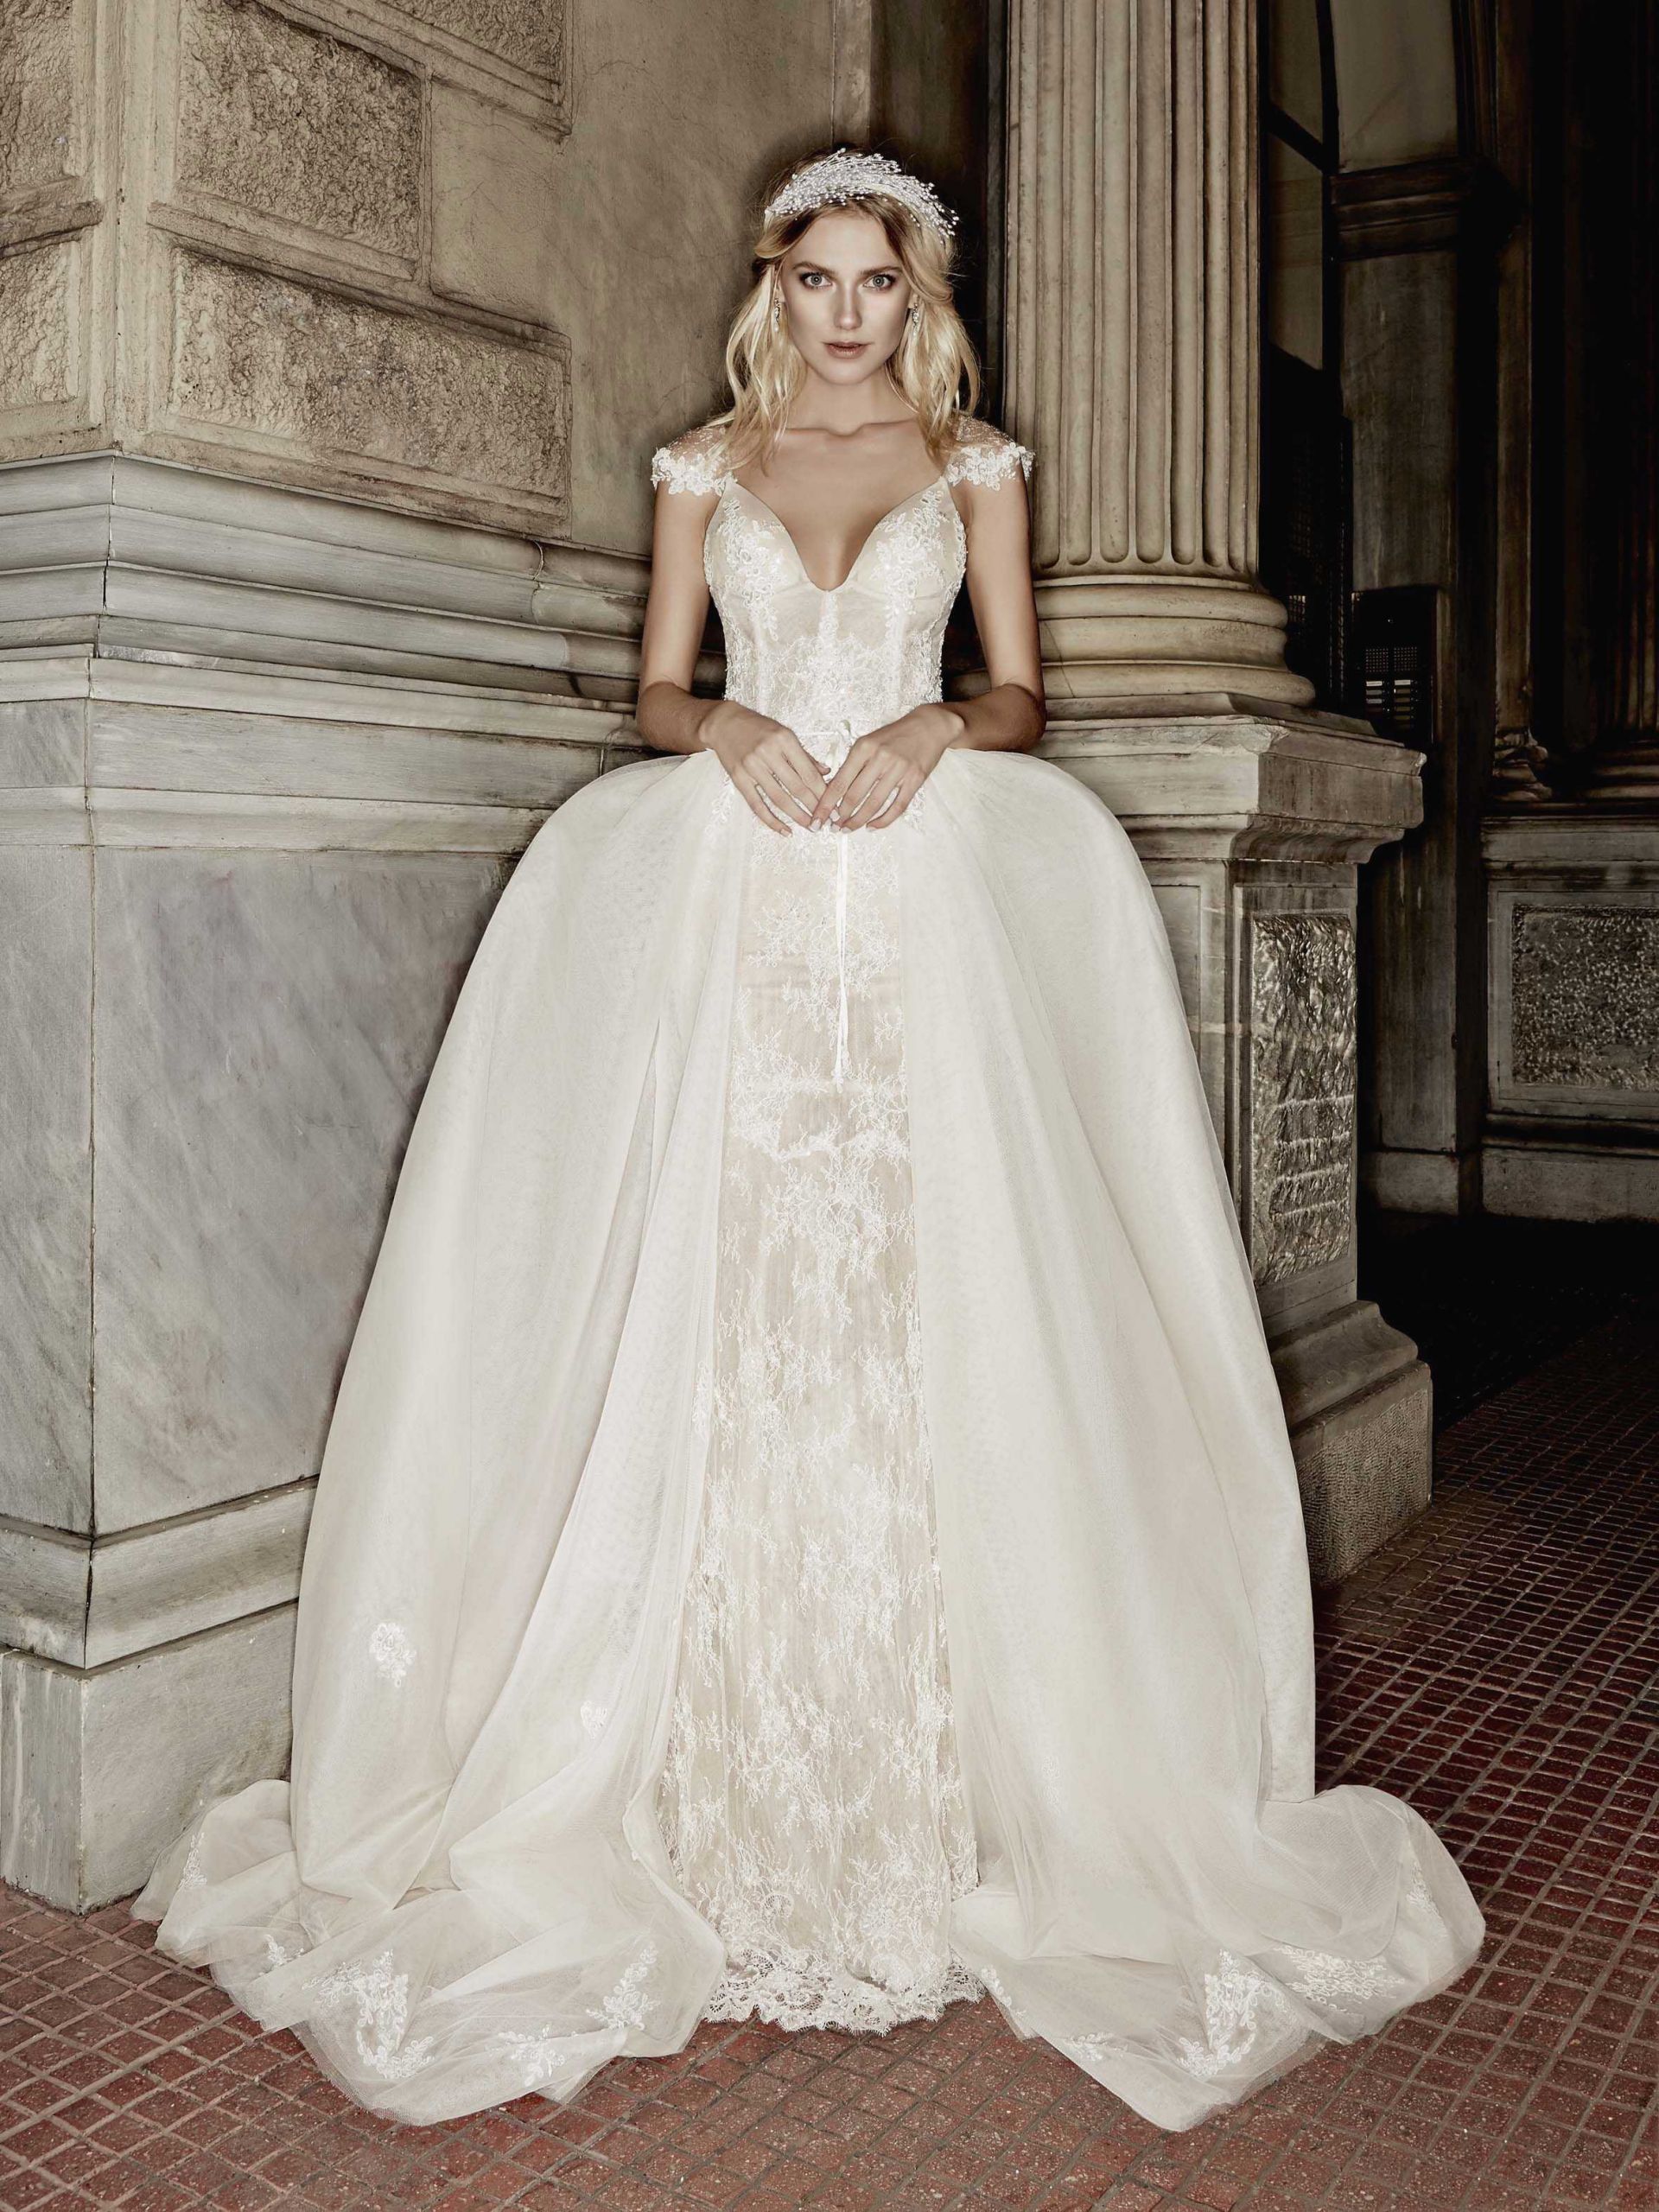 The Best Ideas for Saks Fifth Avenue Wedding Gowns - Home, Family